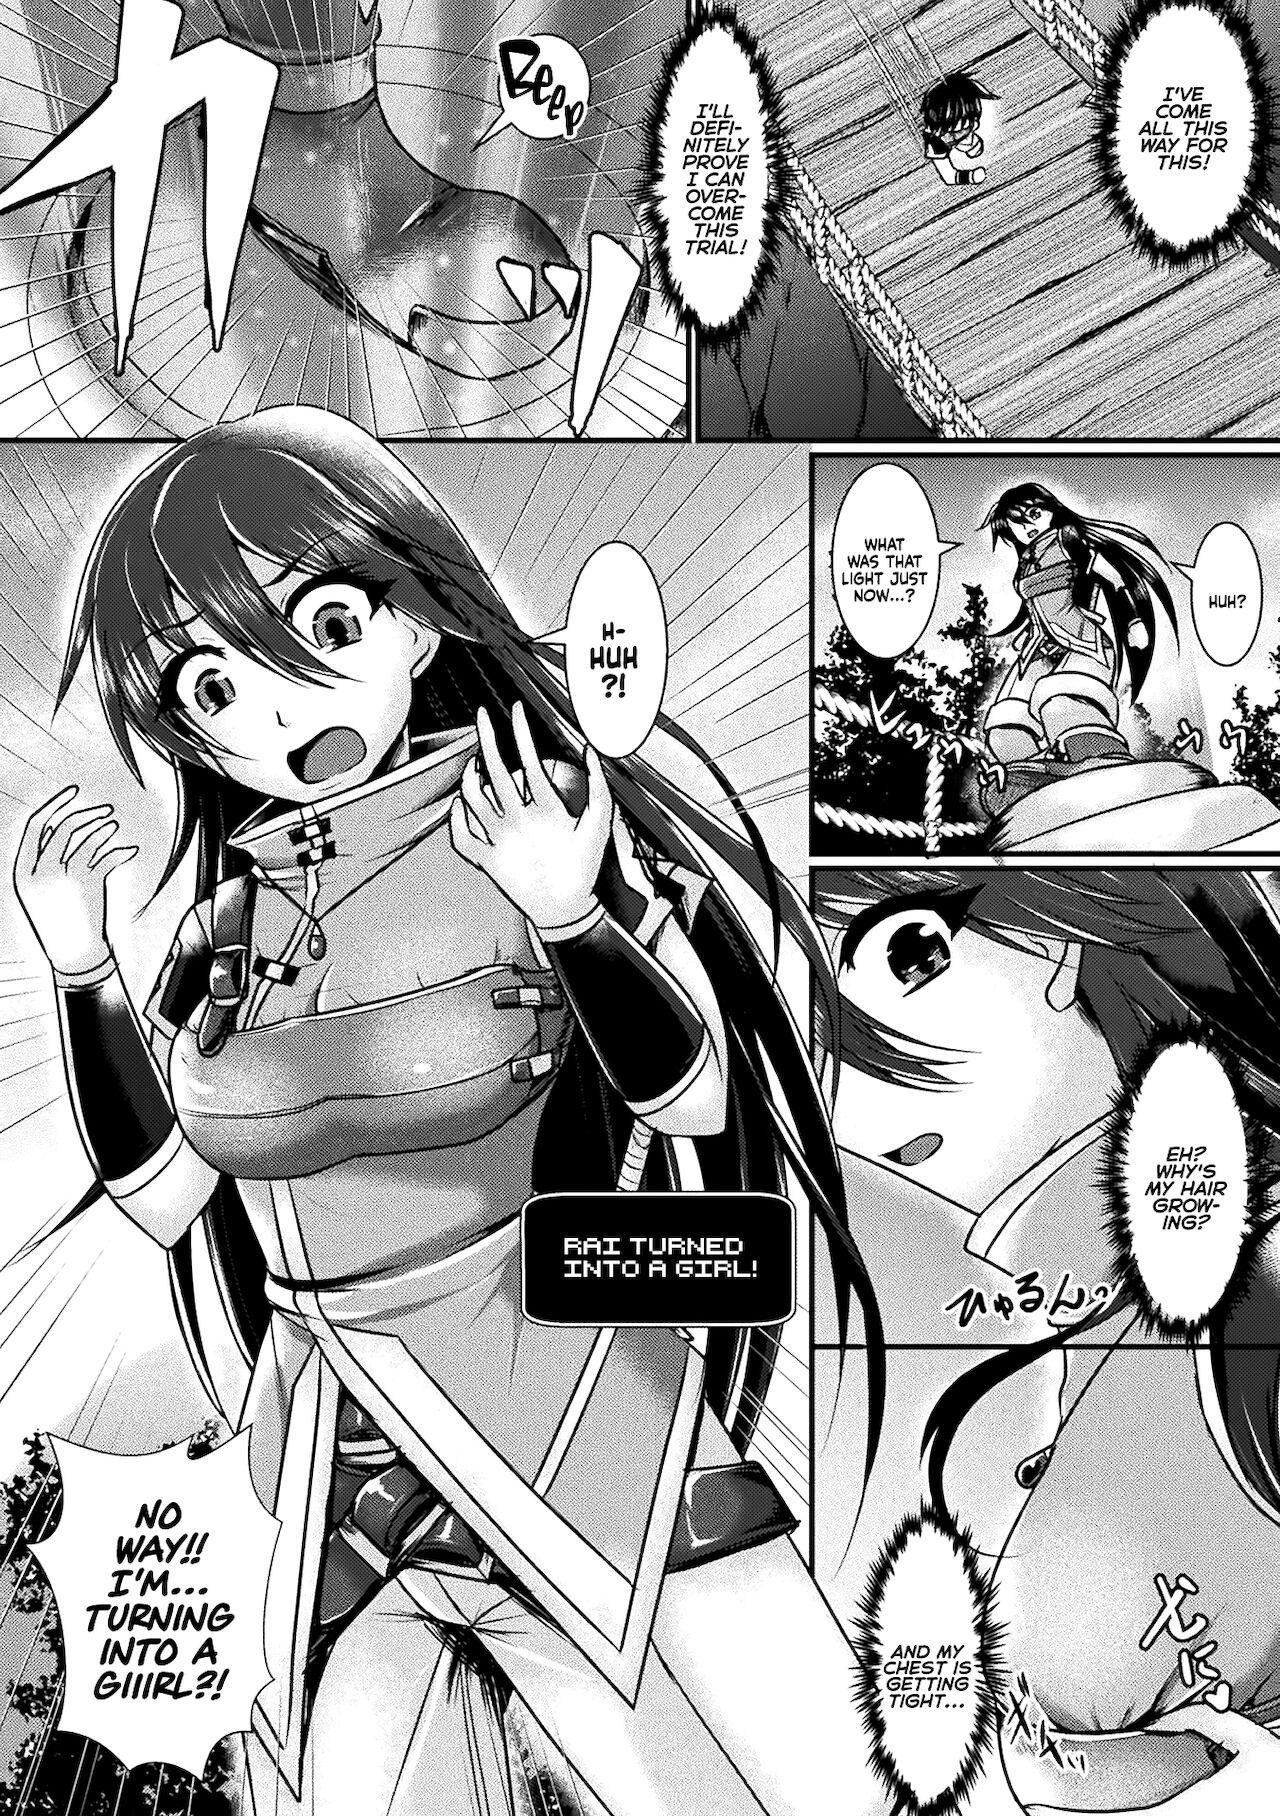 Money Talks The Final Trial - Ero trap dungeon Straight - Page 2